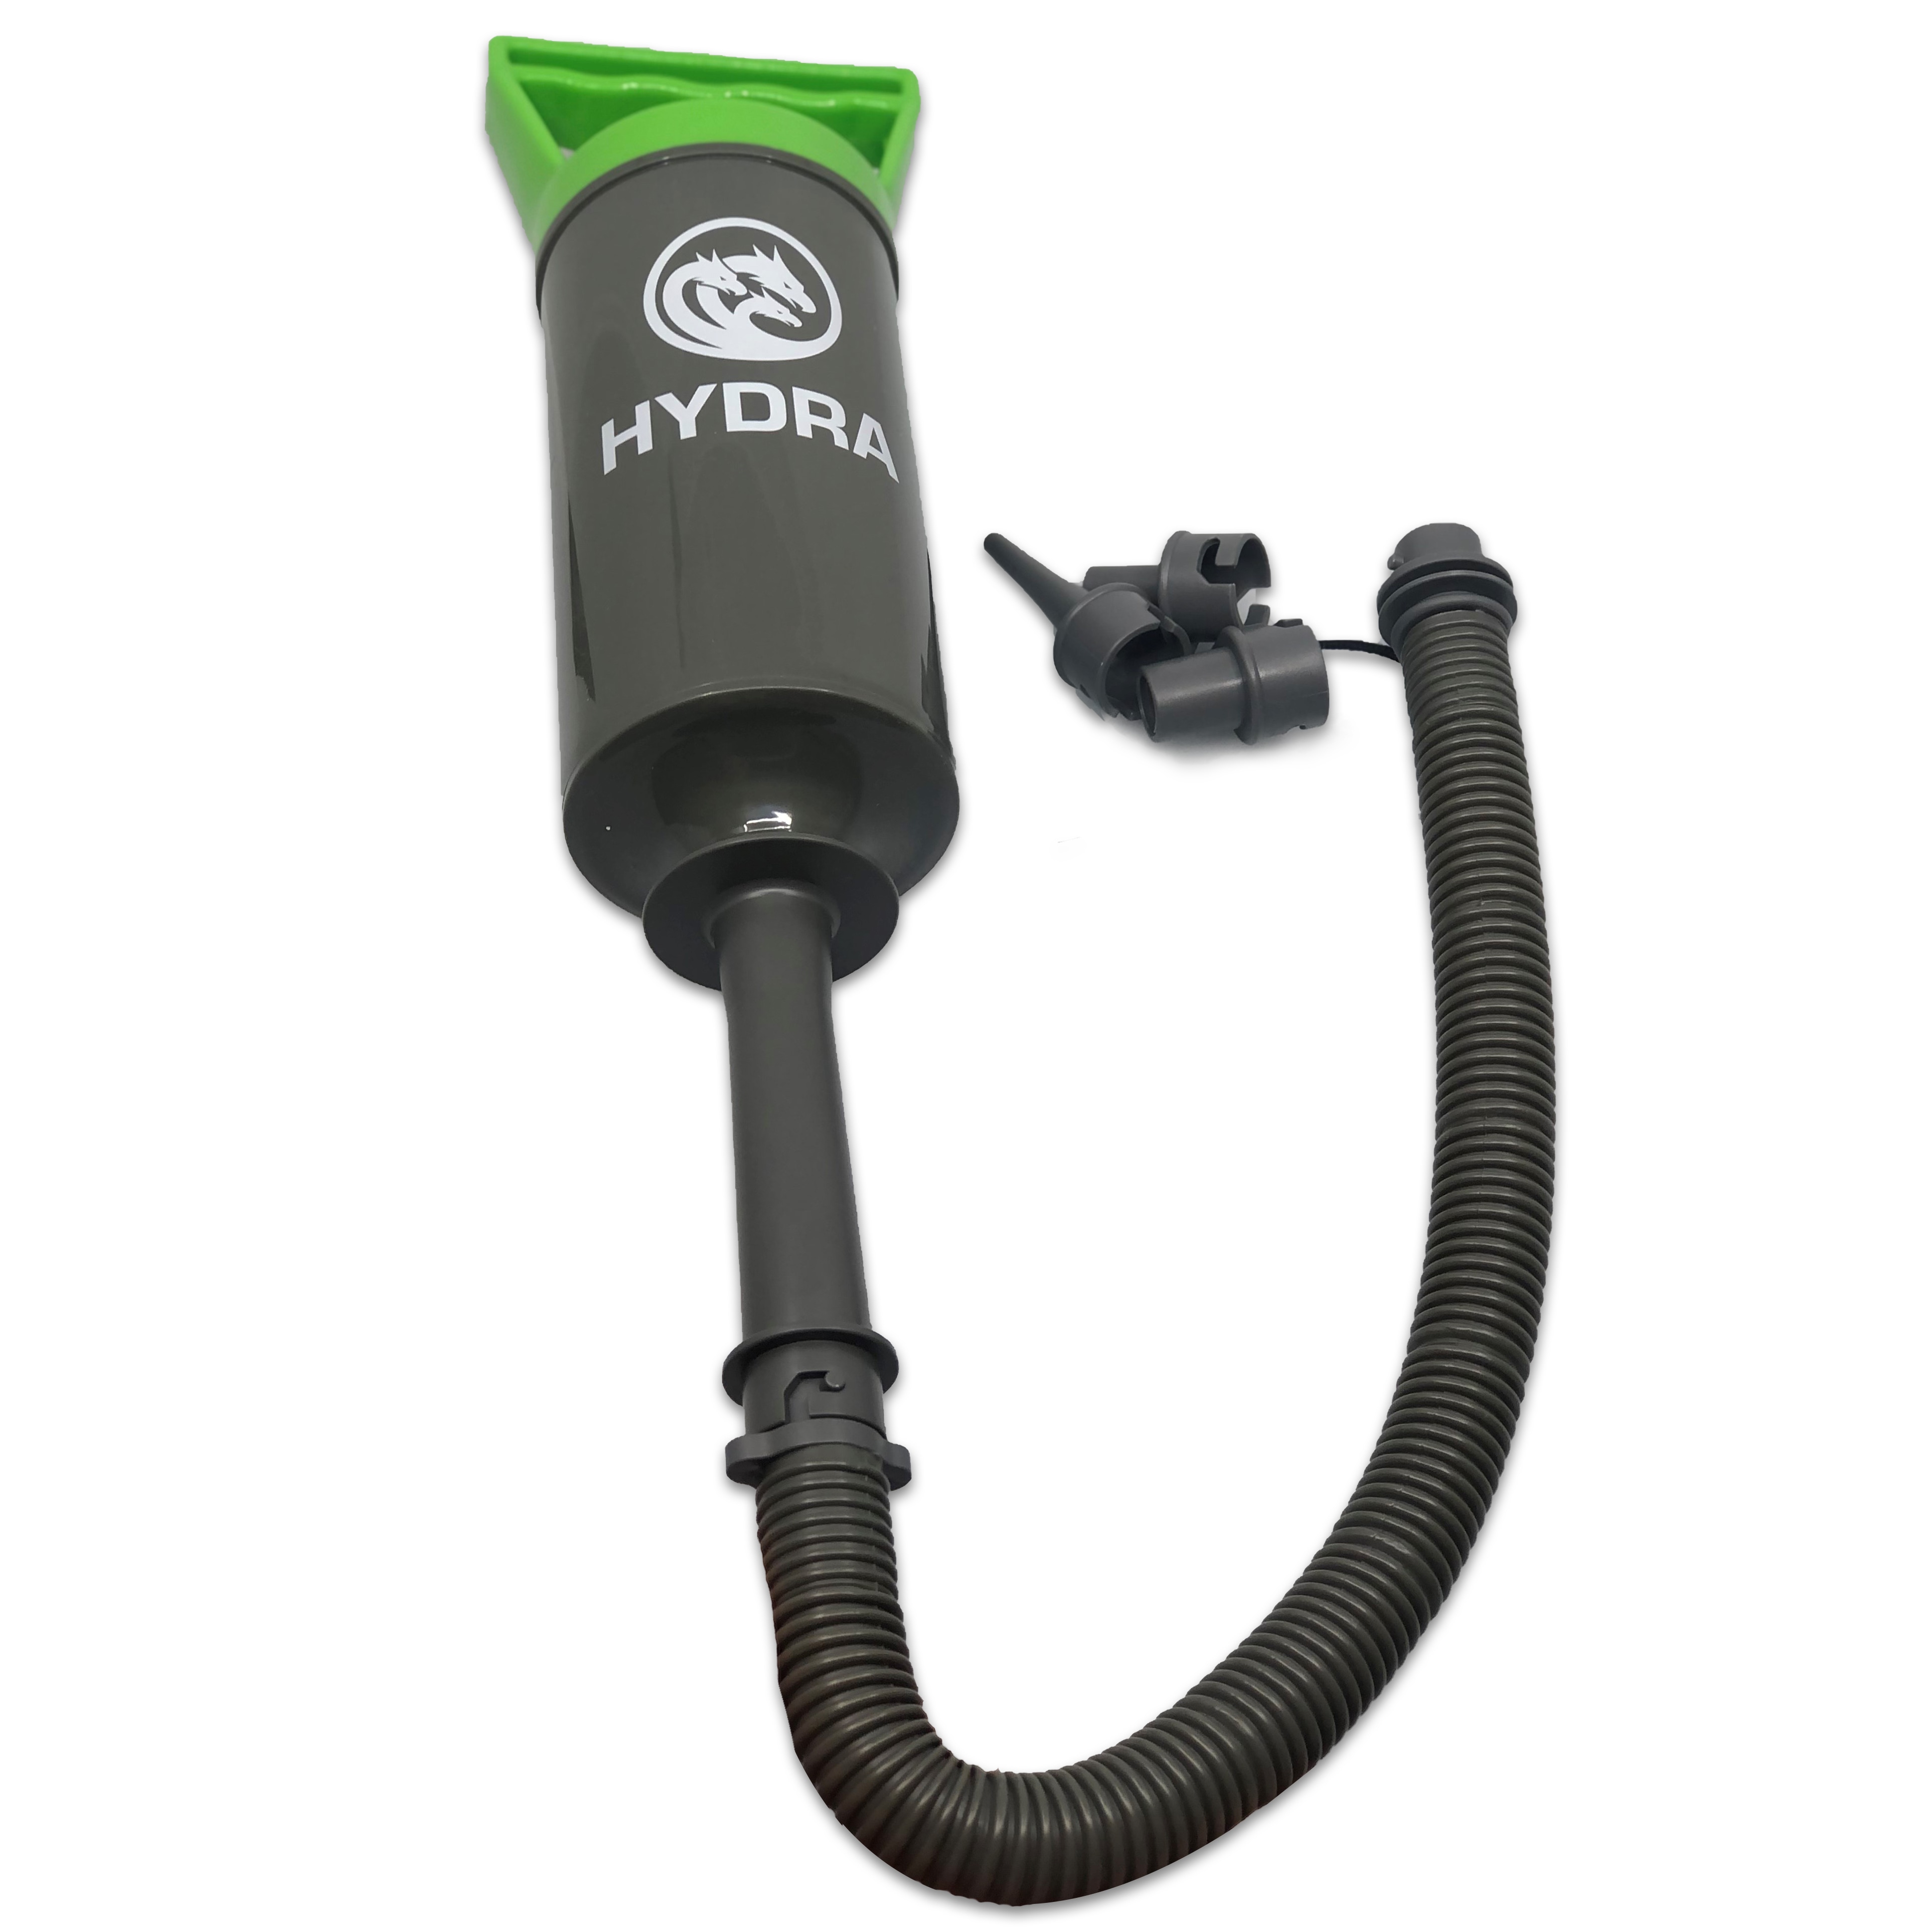 Hydra Double Action Hand Pump